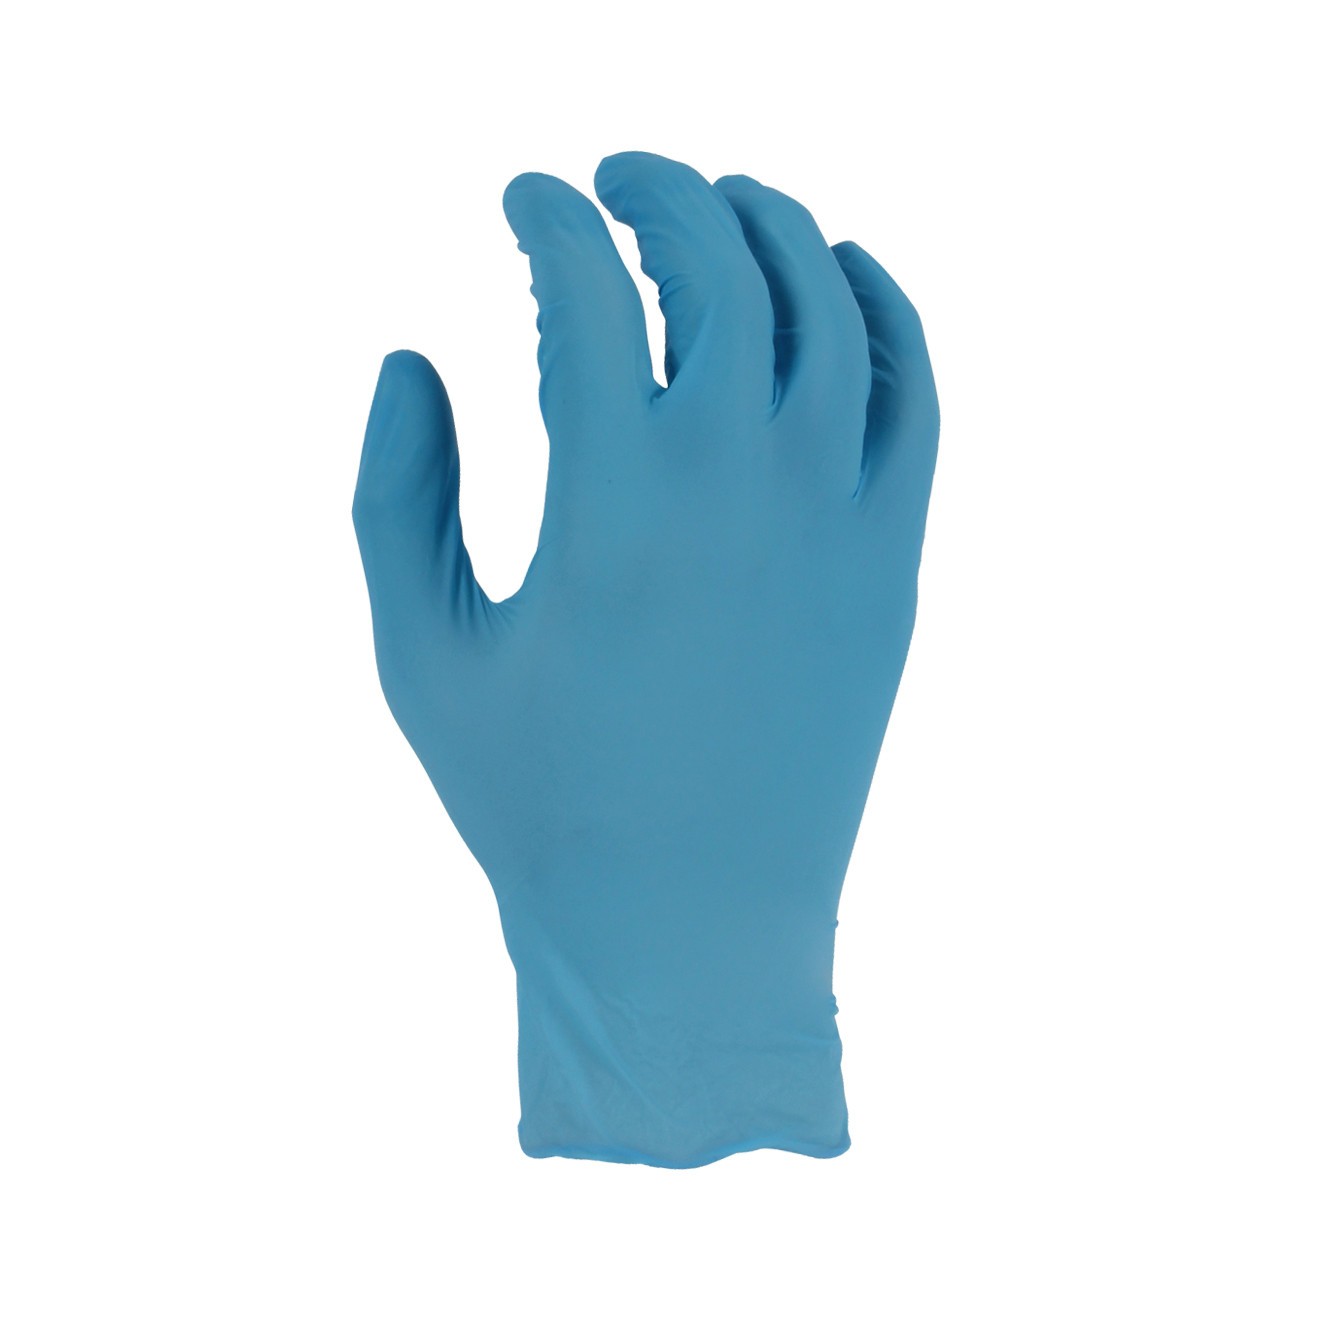 Dextra Touch Disposable Nitrile Glove